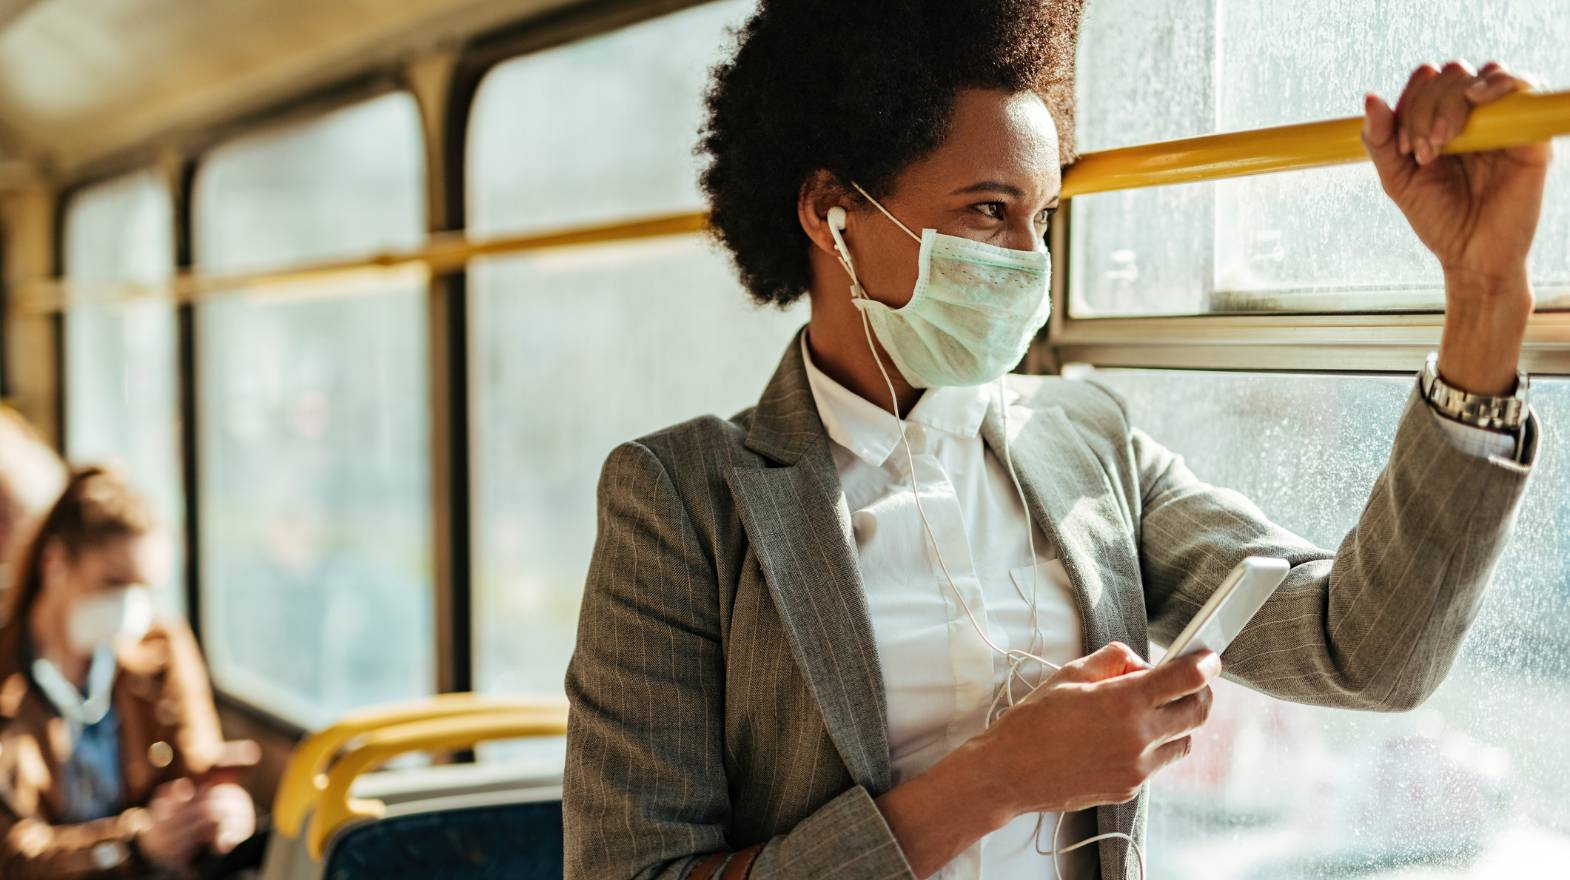 Woman with medical mask looking outside of public transportation window